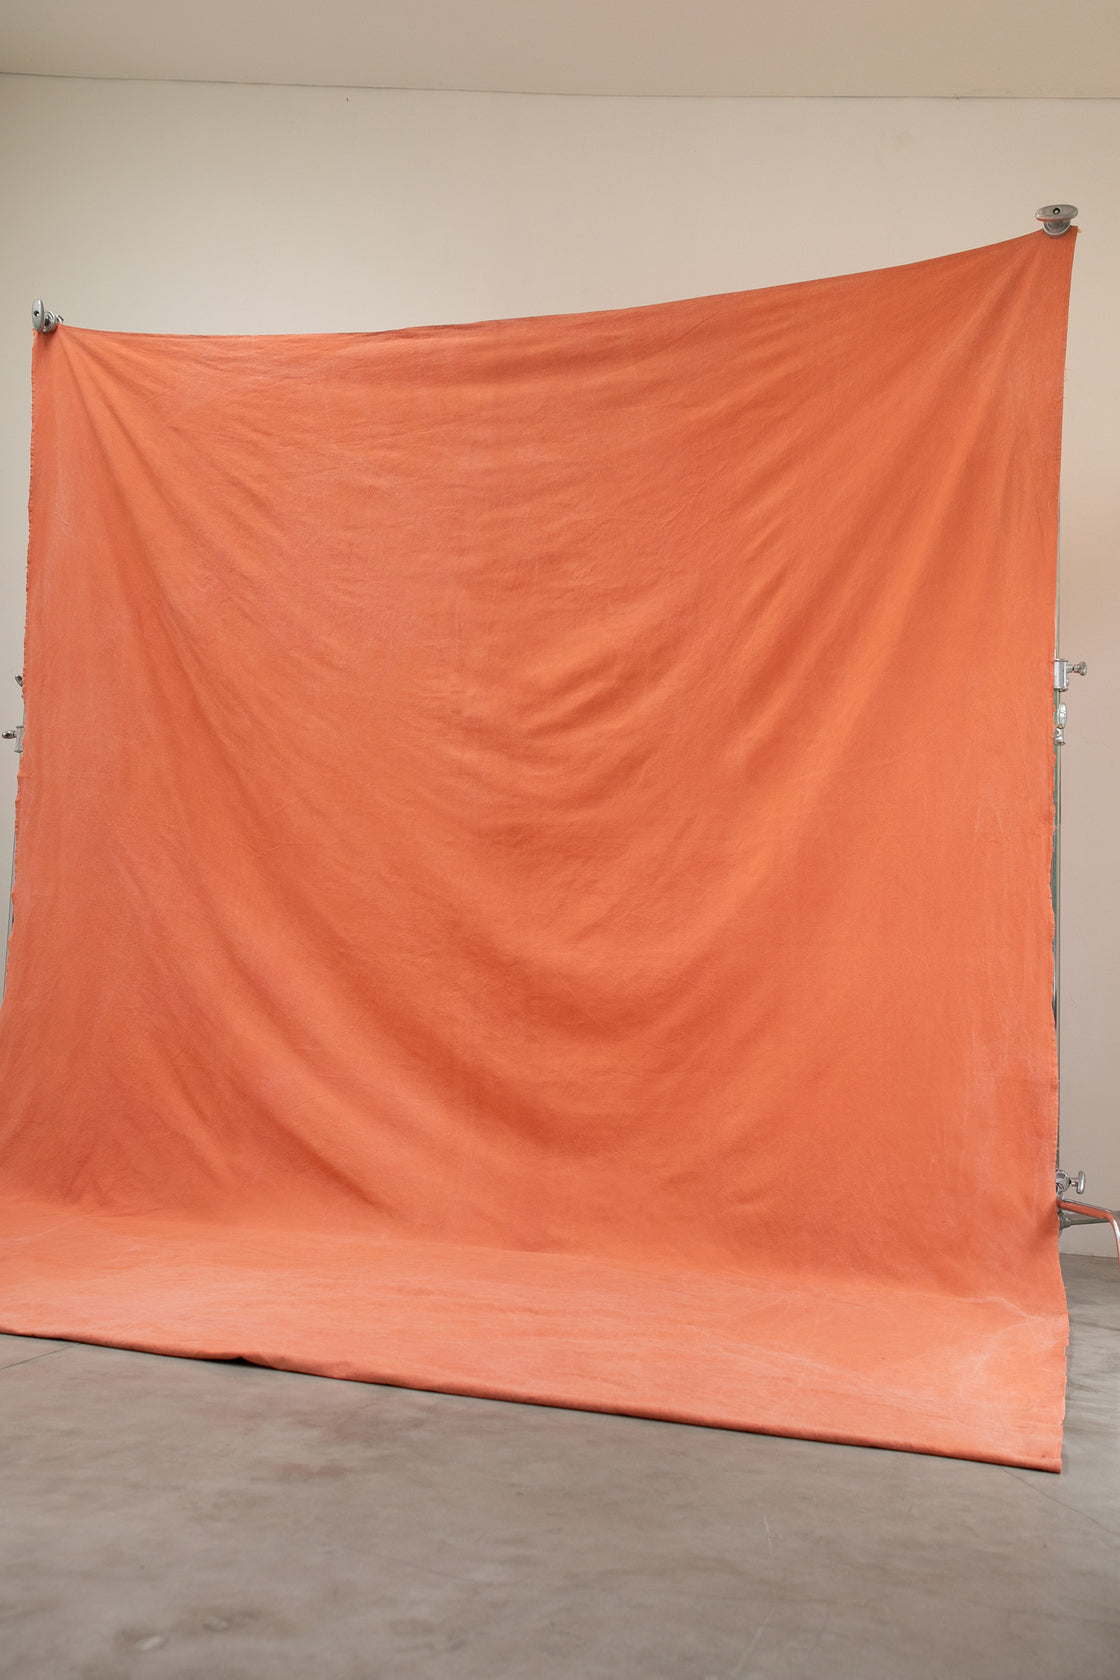 [3x2.5m] Canvas Backdrop Coral Red